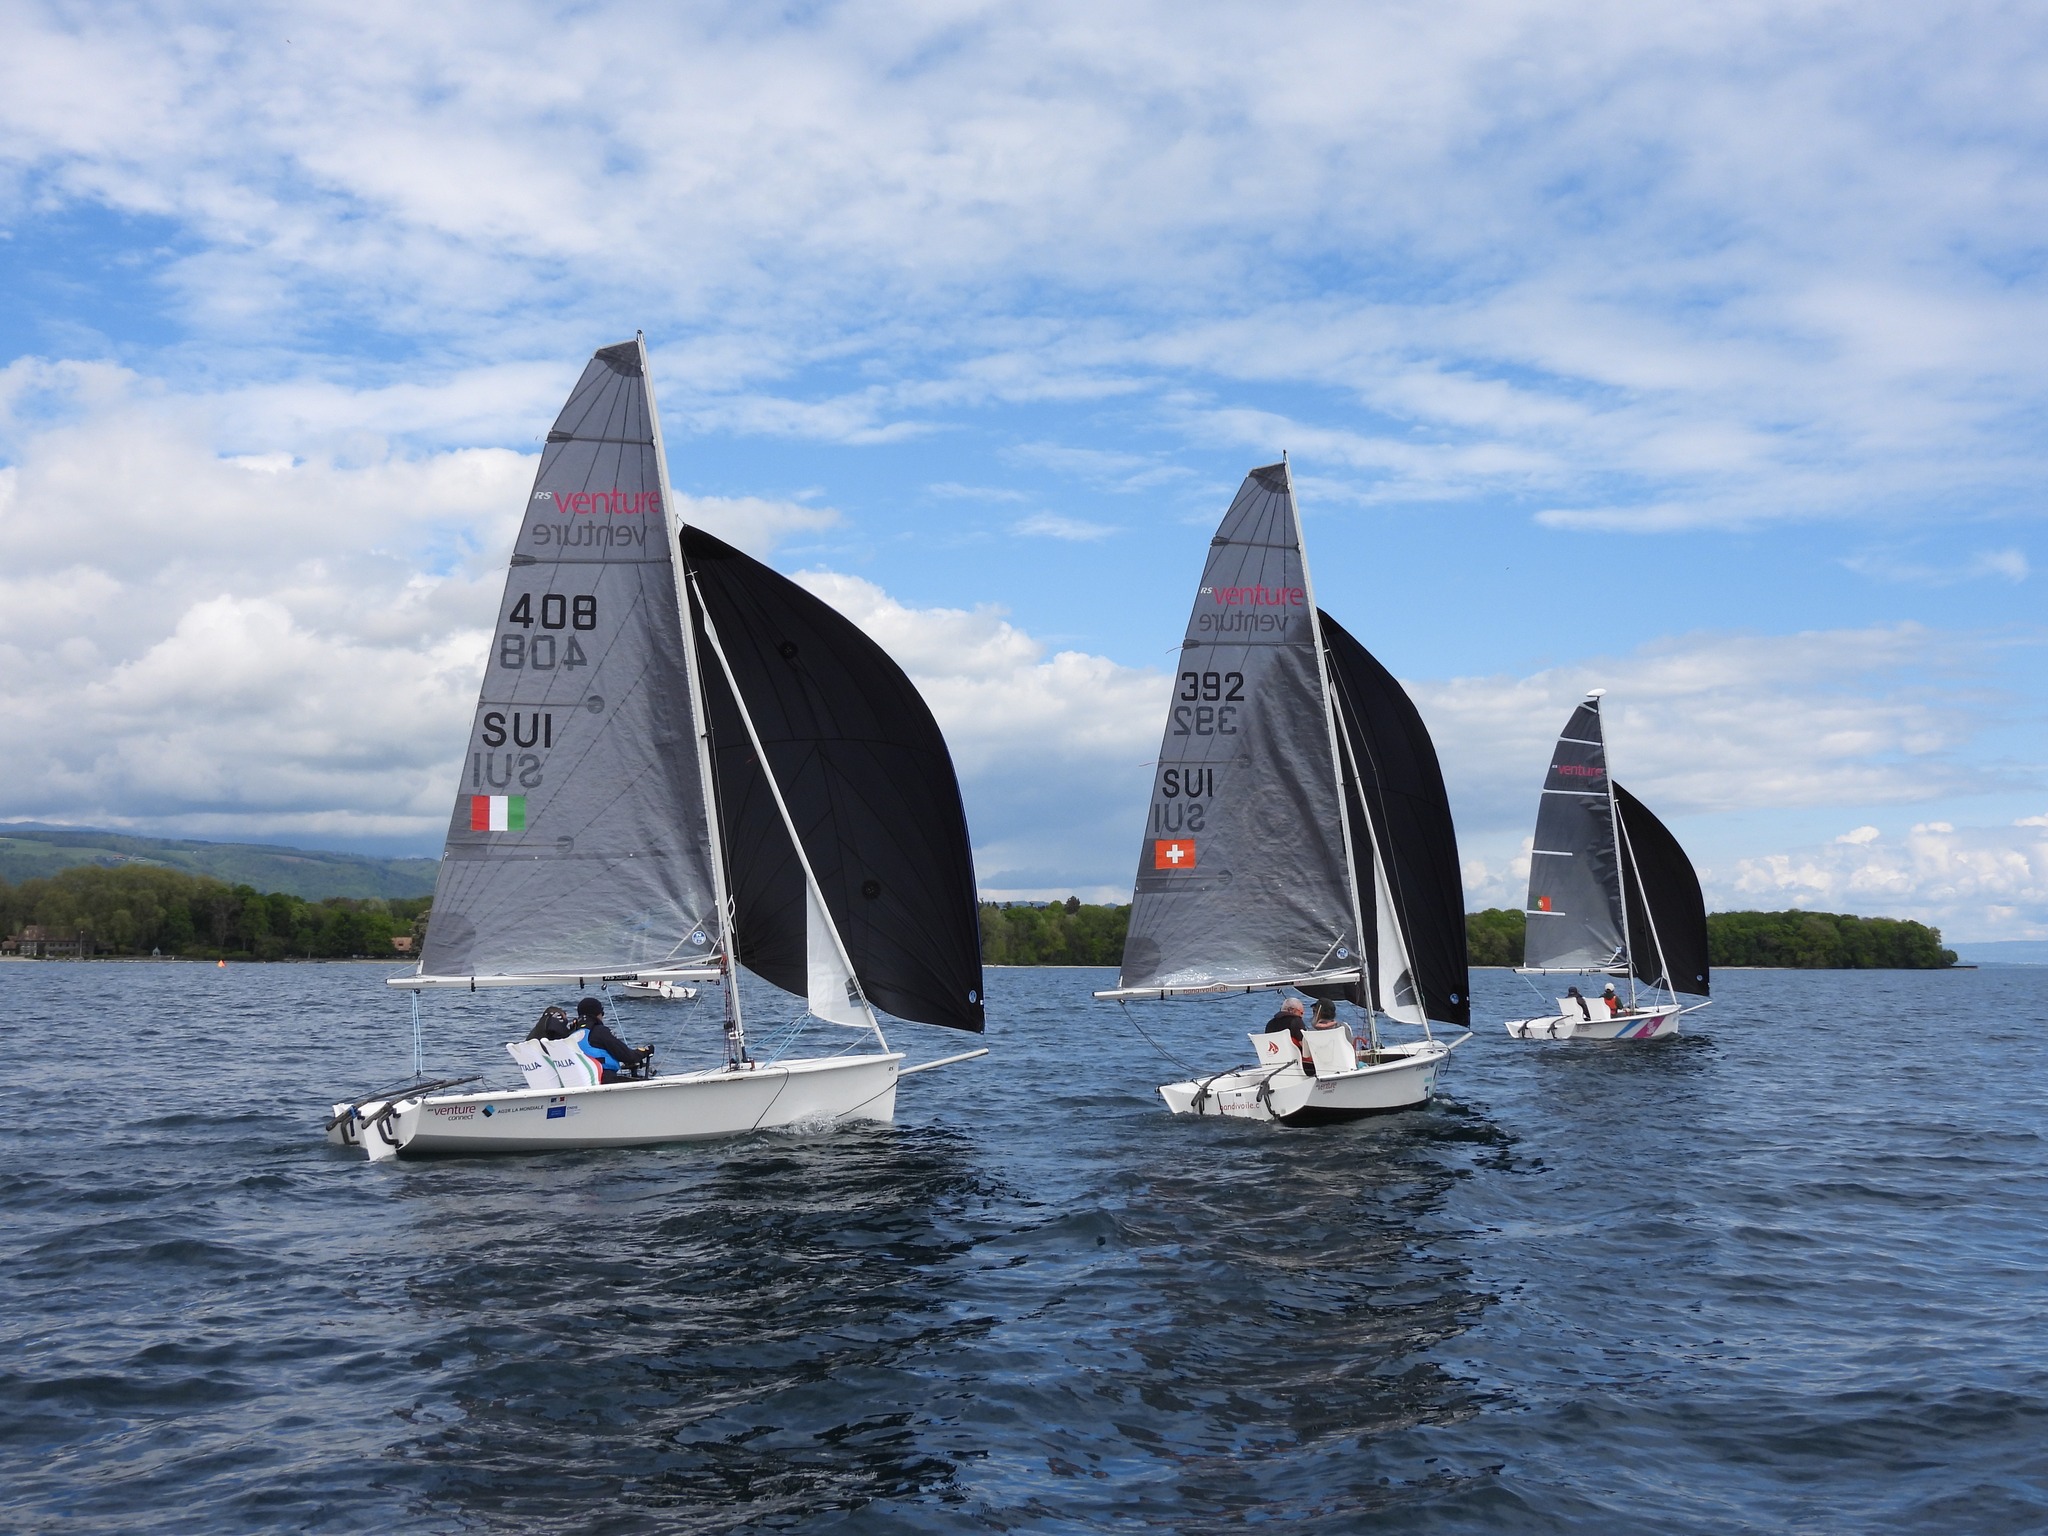  RS Venture - Swiss Inclusive Cup - CV Prangins - Final results